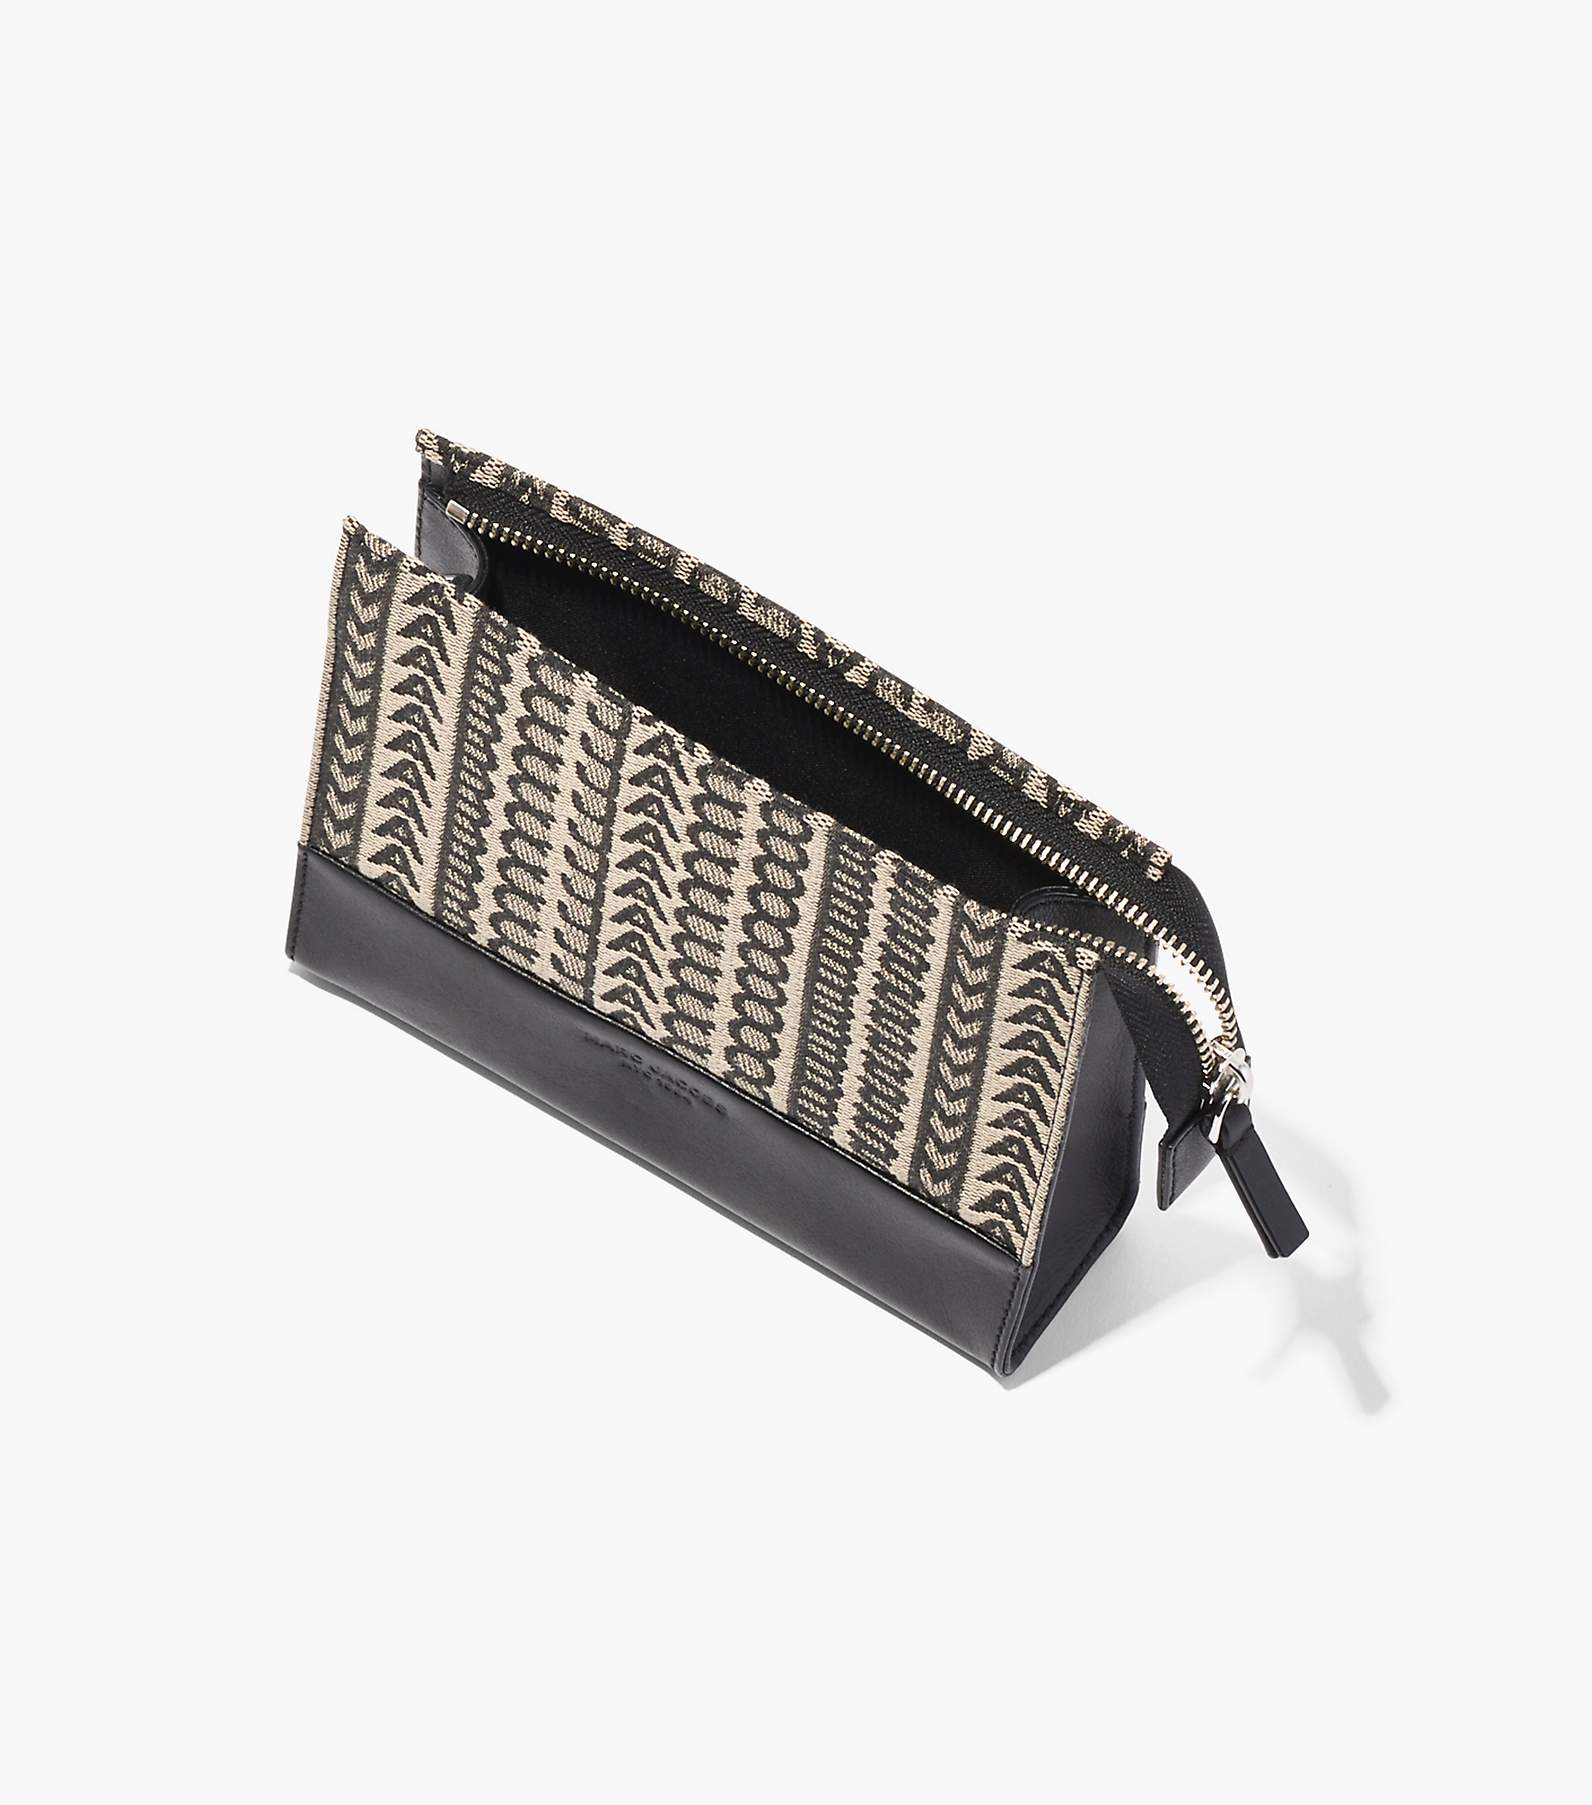 Marc Jacobs The Pouch Clutch Bag